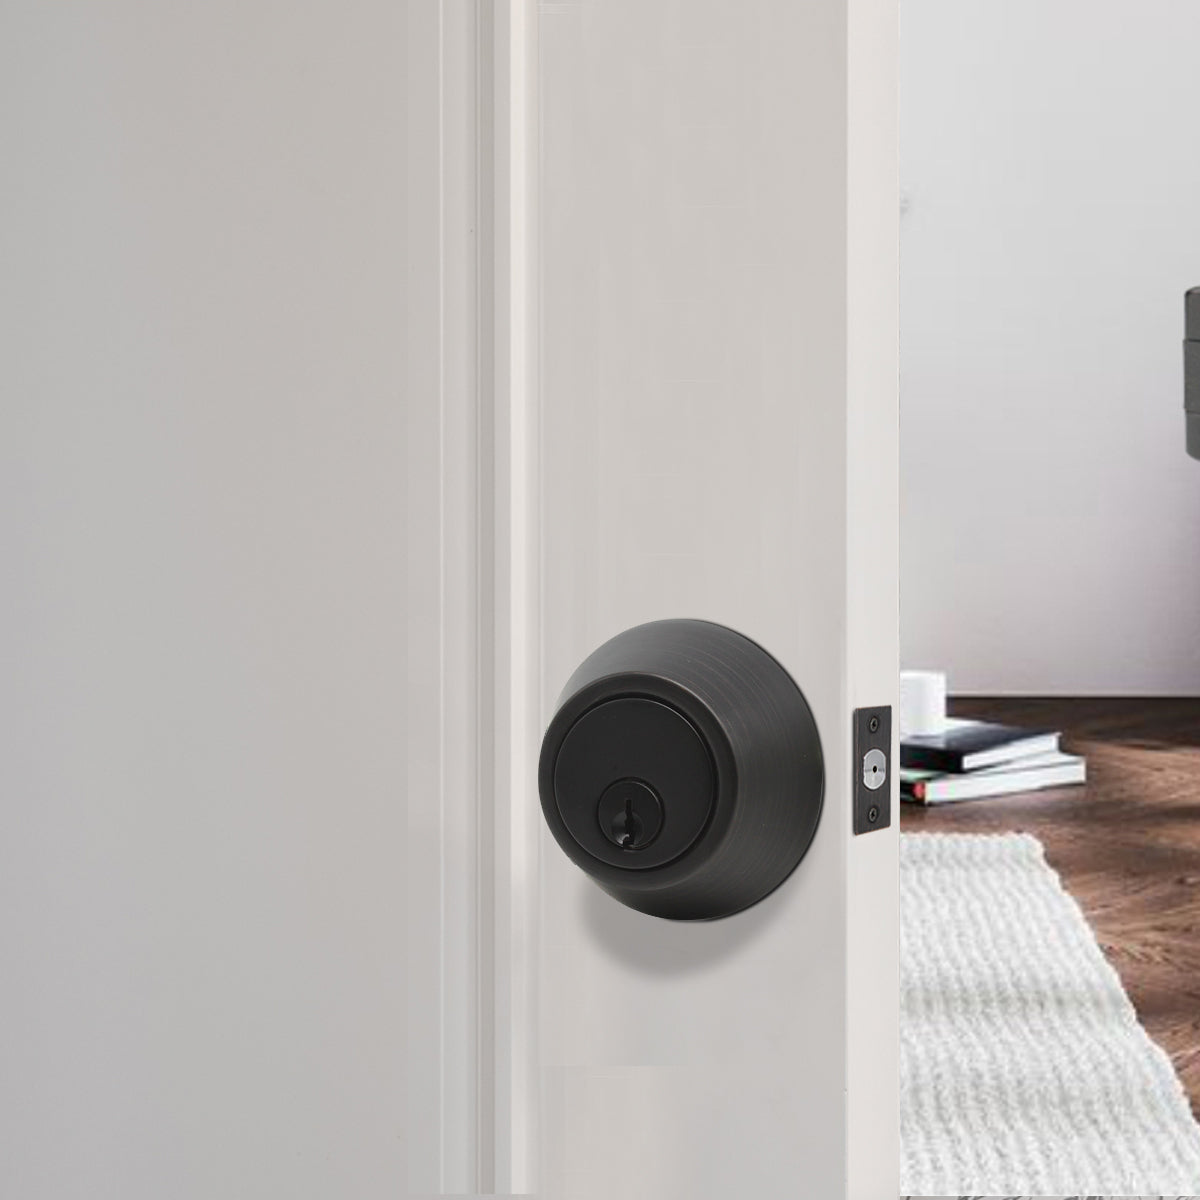 Double Cylinder Deadbolts with Key on Both Side, Keyed Entry Door Lock Oil Rubbed Bronze Finish DLD102ORB